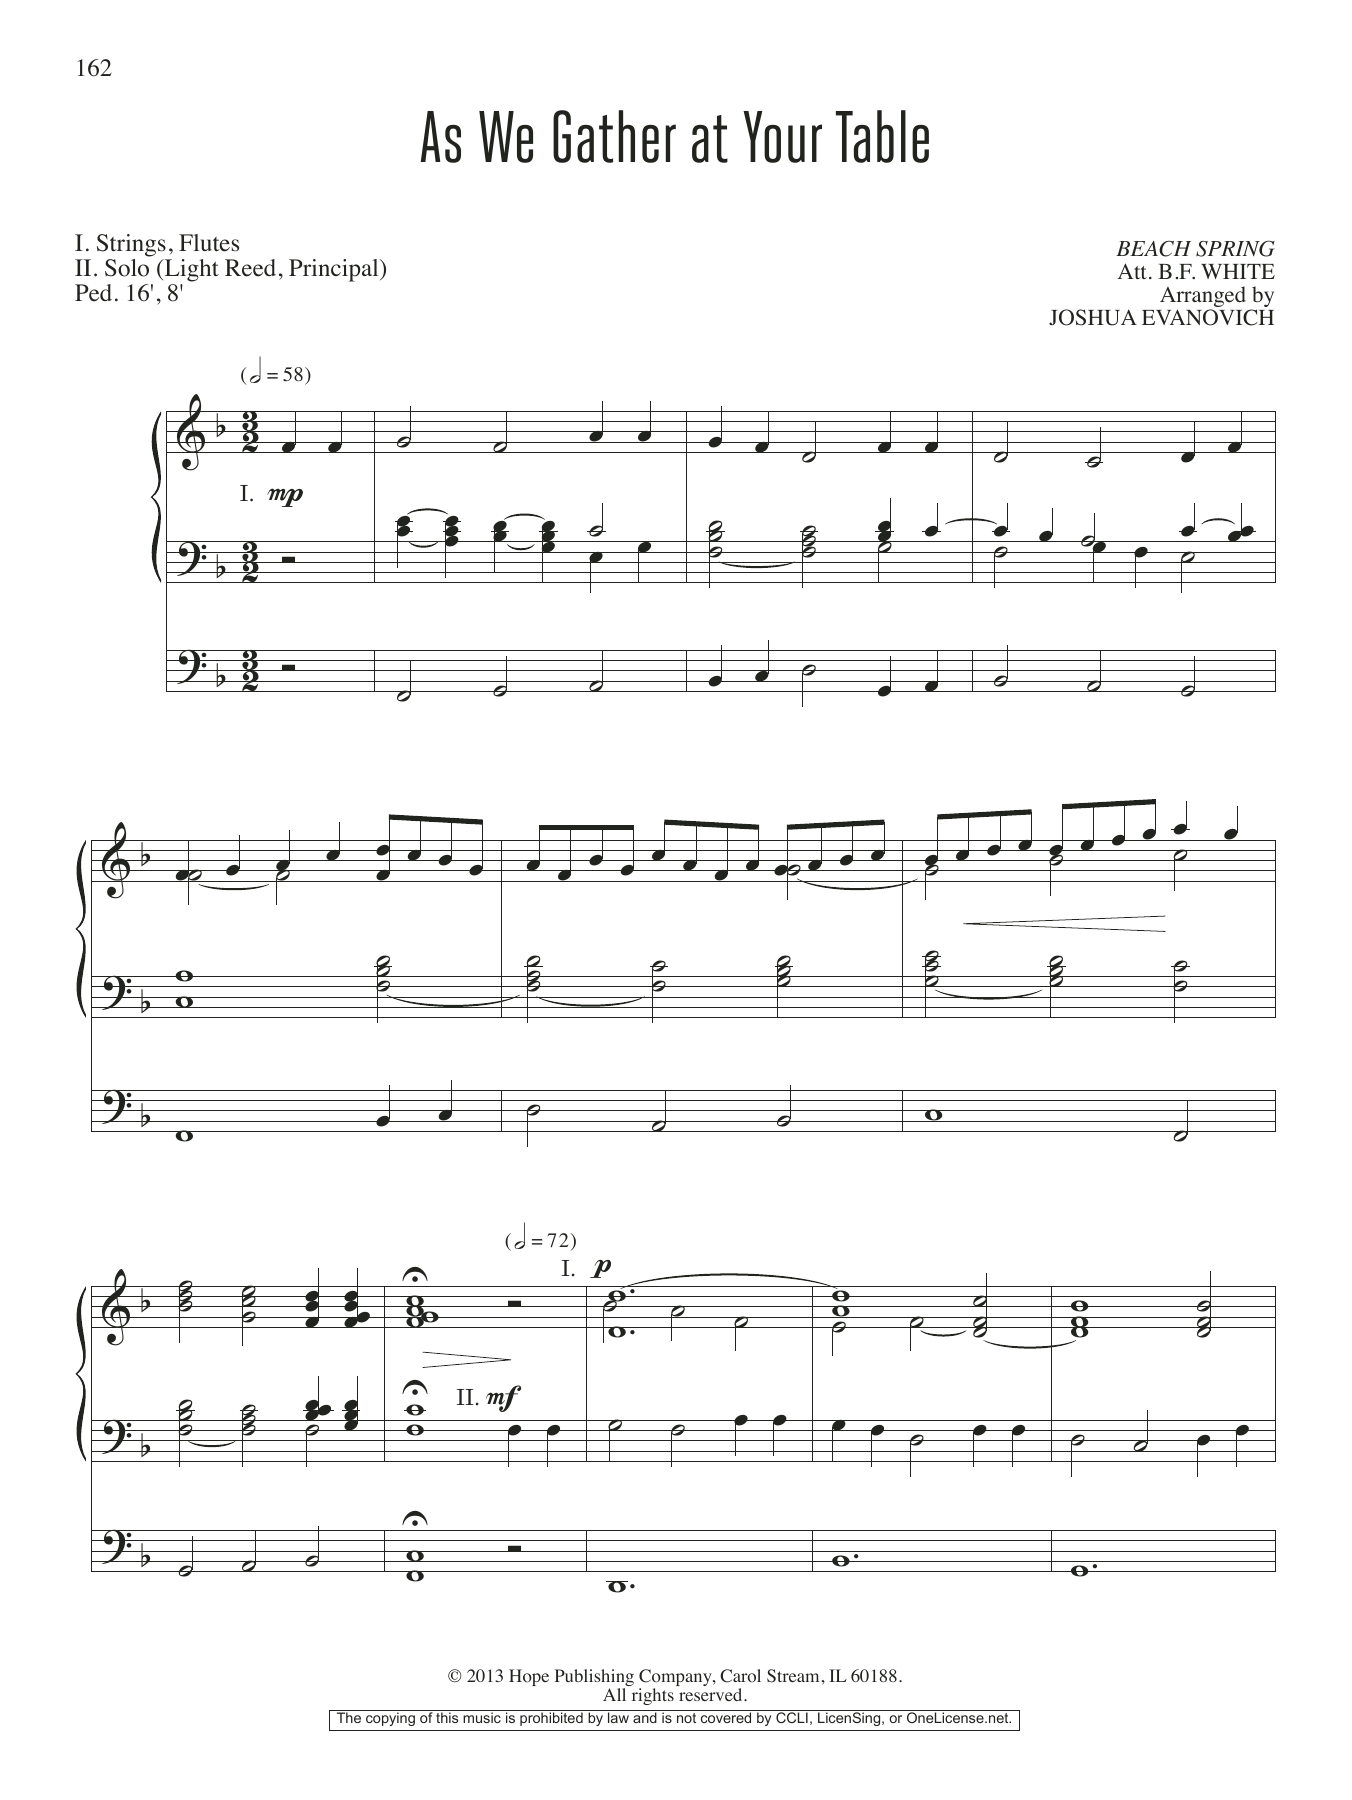 Download Joshua Evanovich As We Gather at Your Table Sheet Music